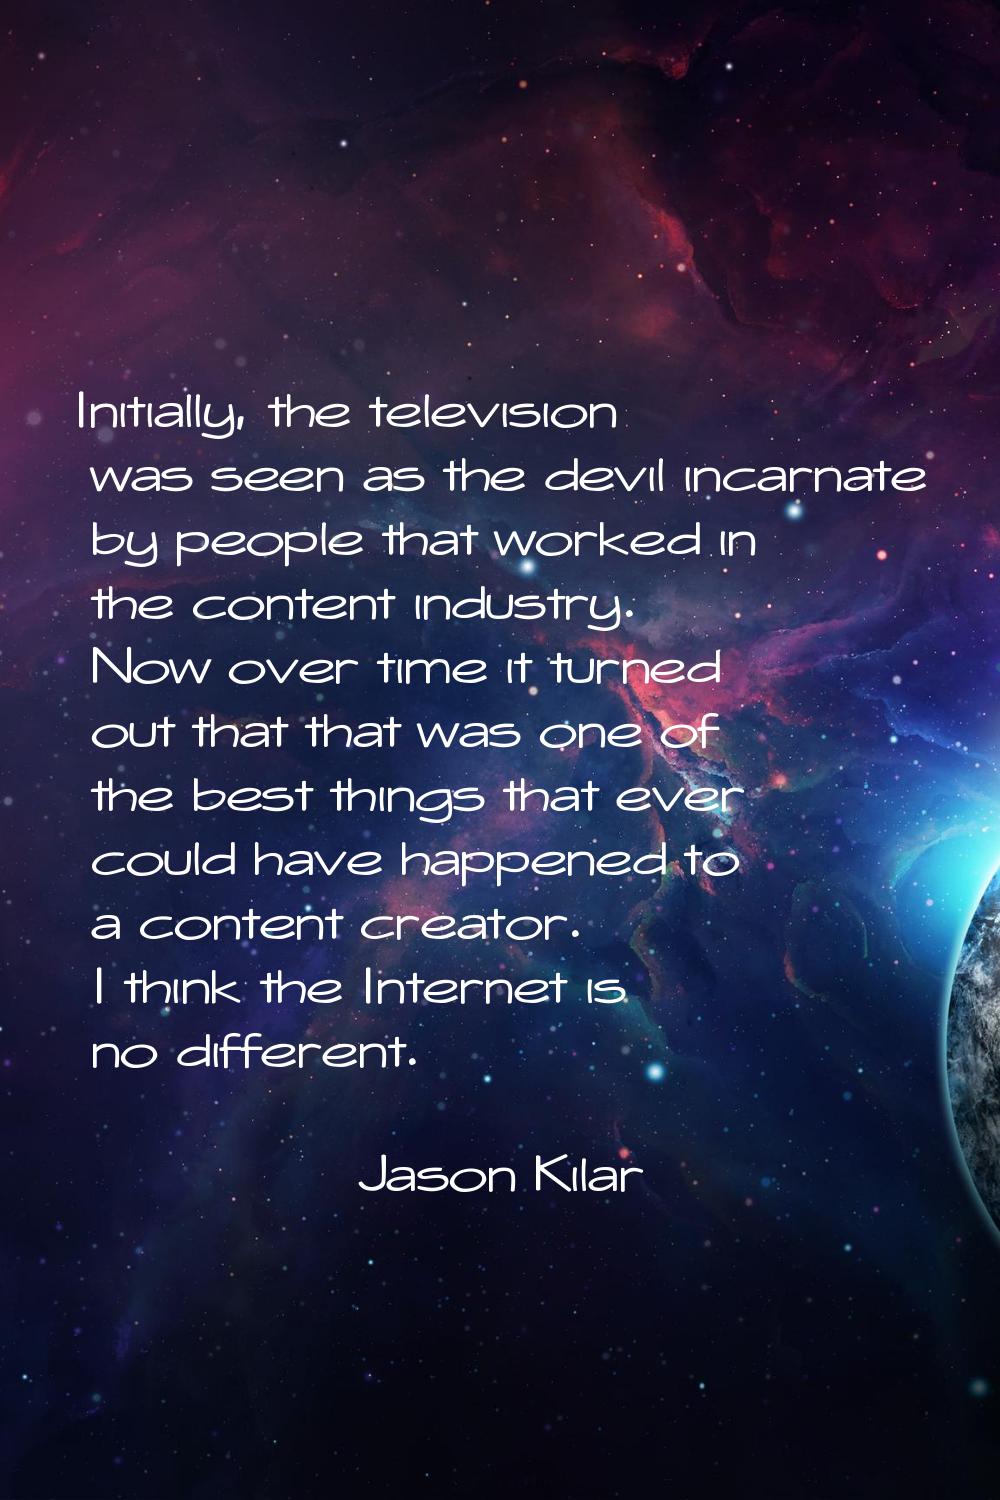 Initially, the television was seen as the devil incarnate by people that worked in the content indu